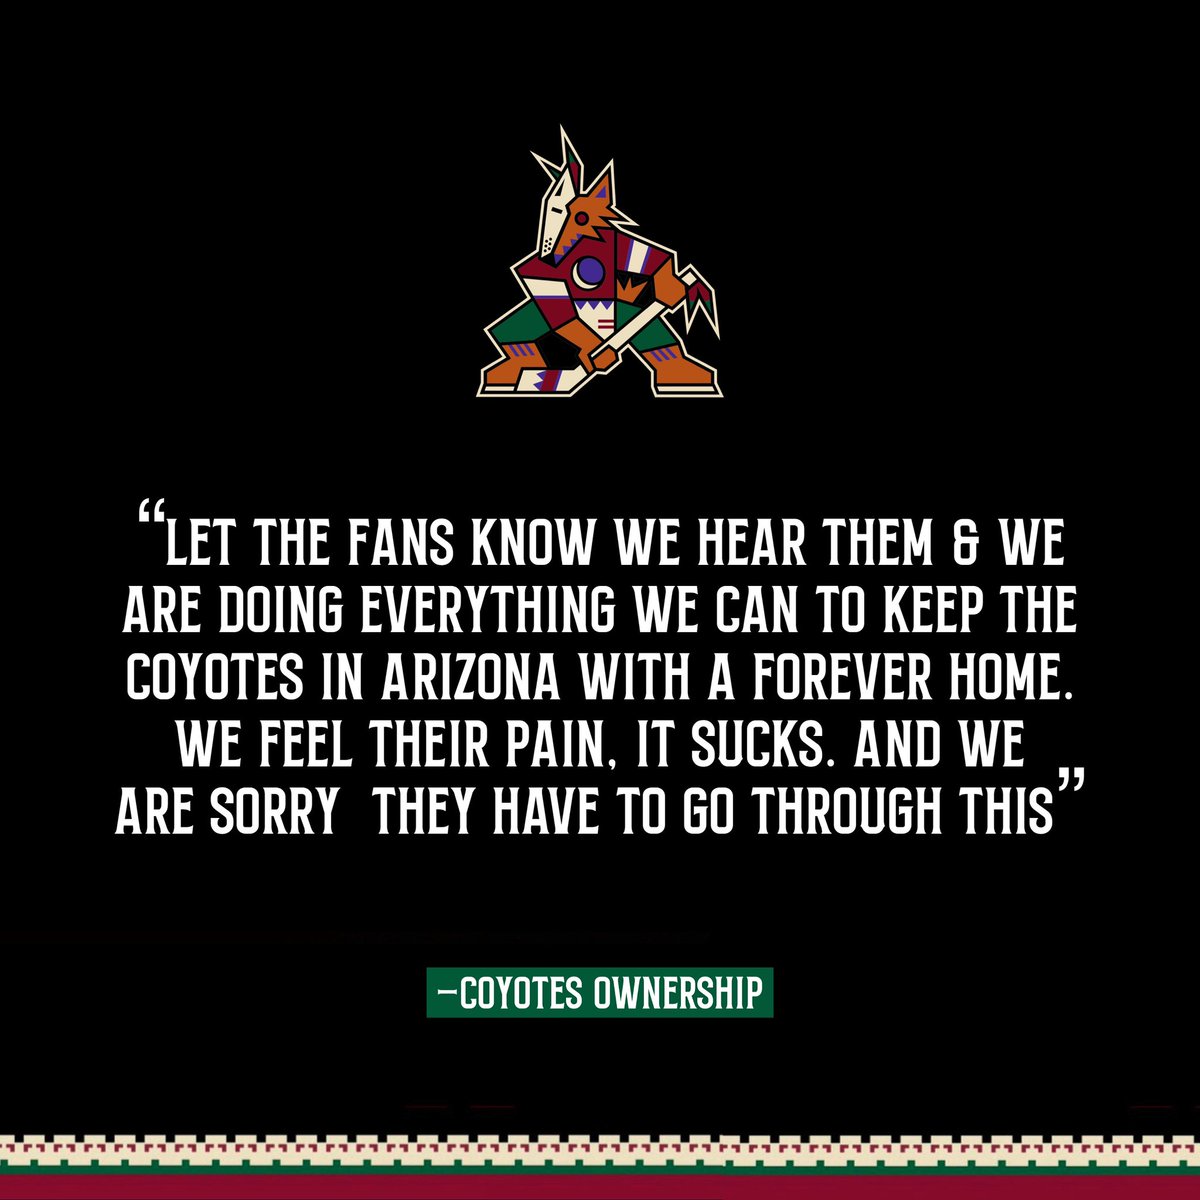 Per my insider source. Wanted to share this quote with the fanbase. I know we are dying to hear anything. #Yotes